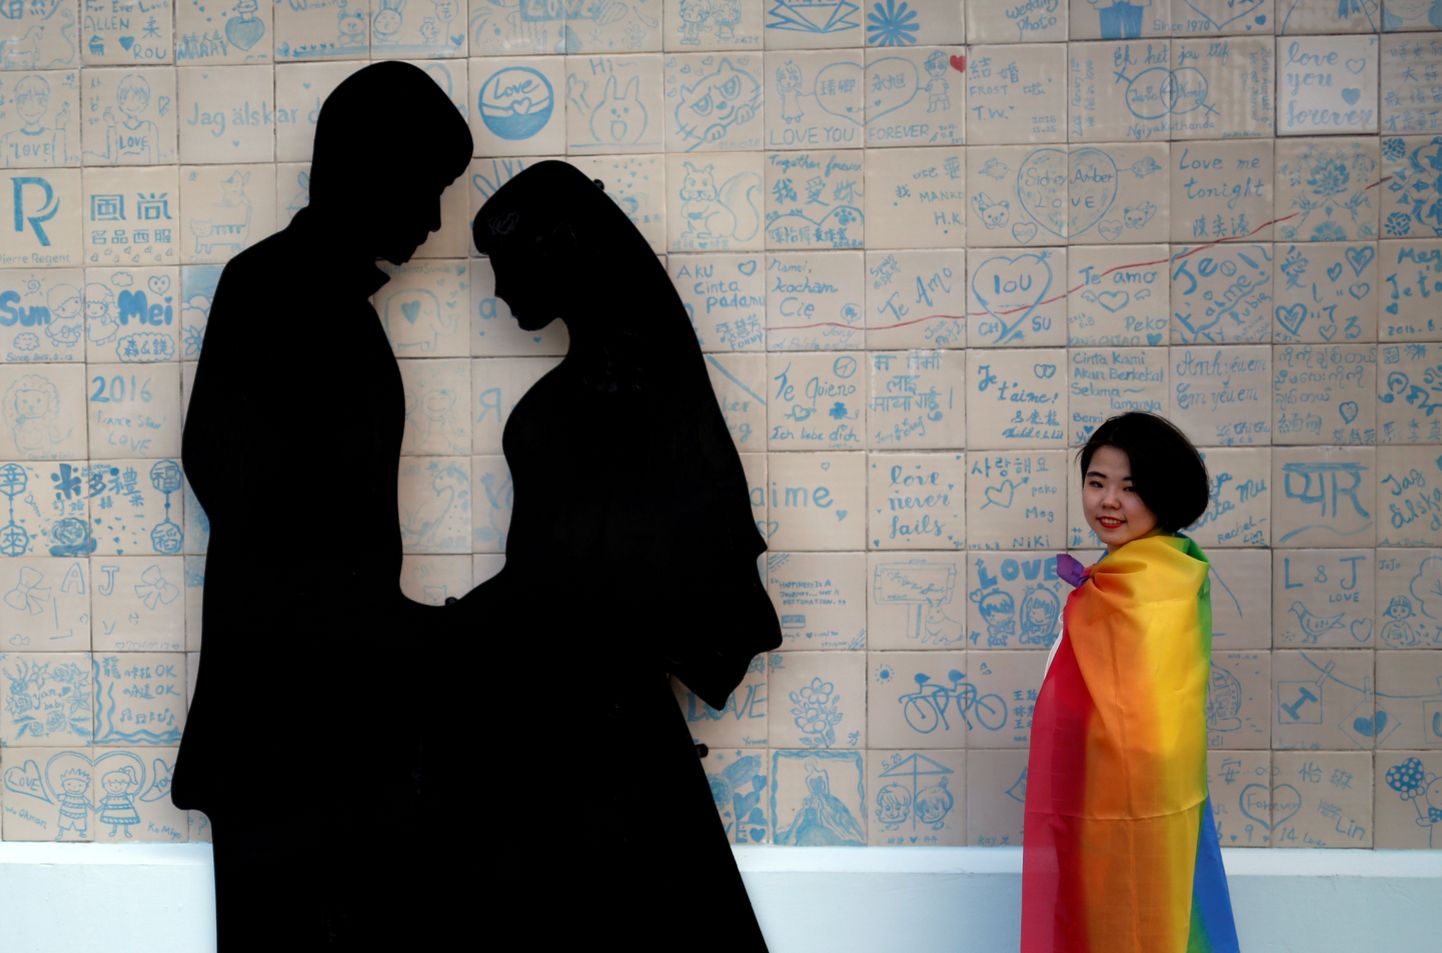 A participant poses next to a wedding studio during a lesbian, gay, bisexual and transgender (LGBT) pride parade to support same-sex marriage in Taipei, Taiwan, October 27, 2018. REUTERS/Tyrone Siu     TPX IMAGES OF THE DAY